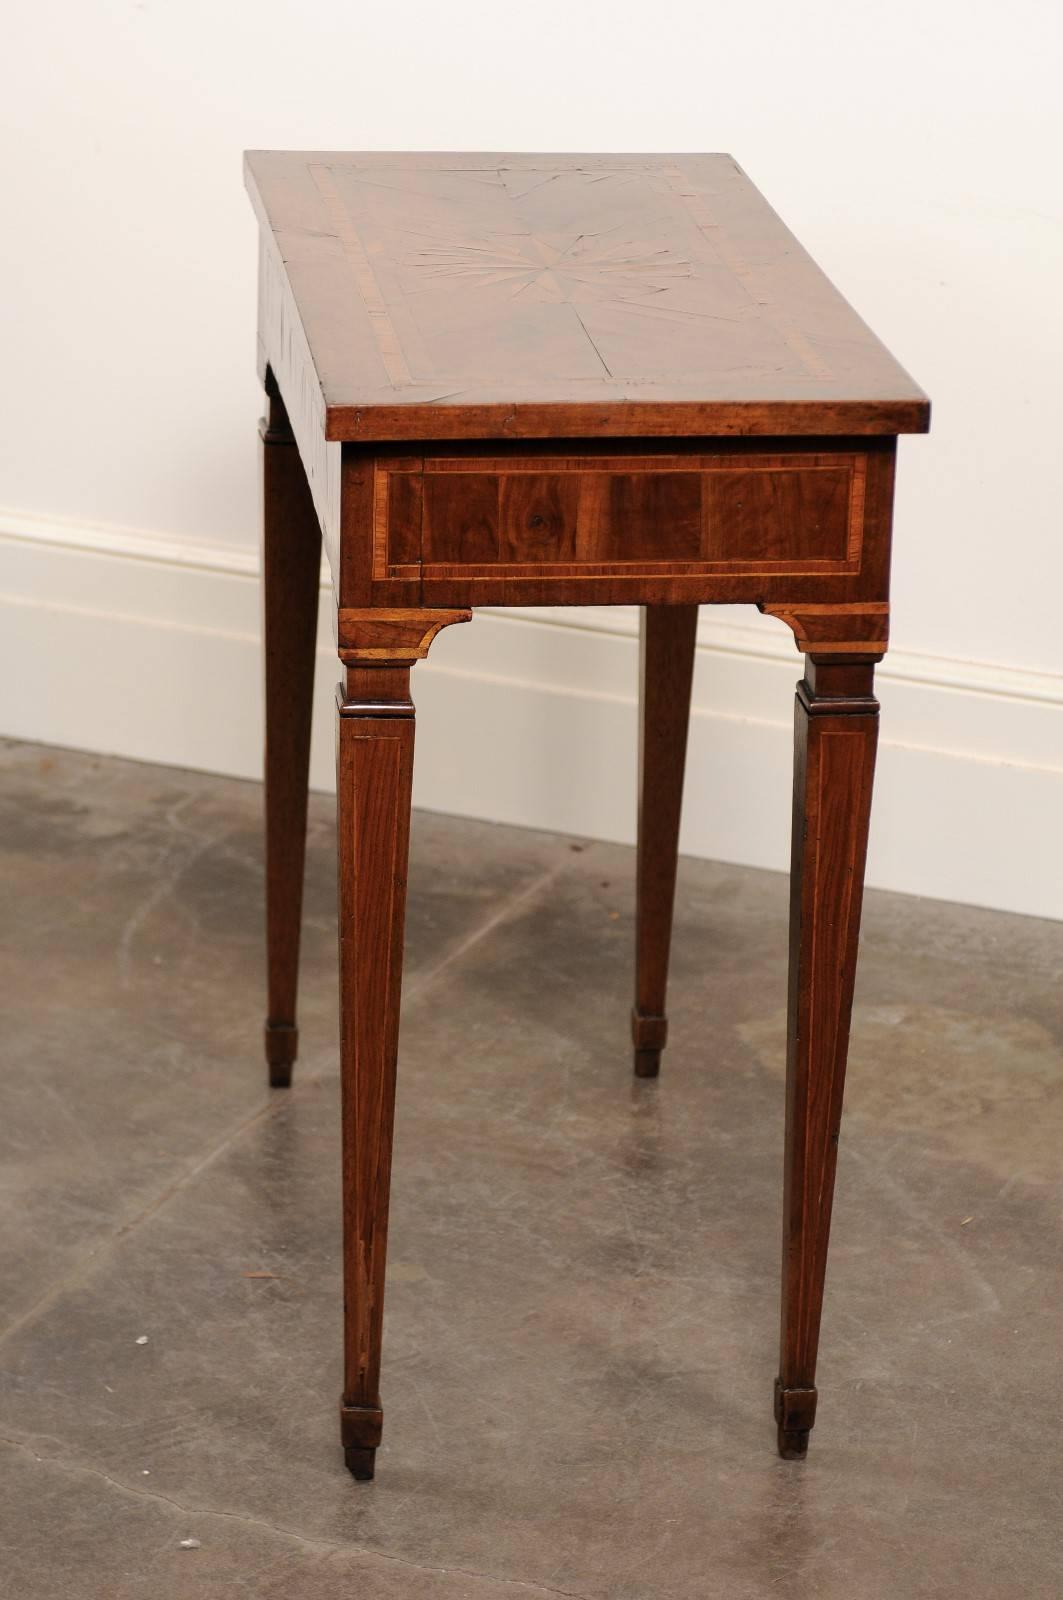 Italian 18th Century Console Table with Marquetry Inlaid Top and Tapered Legs For Sale 1